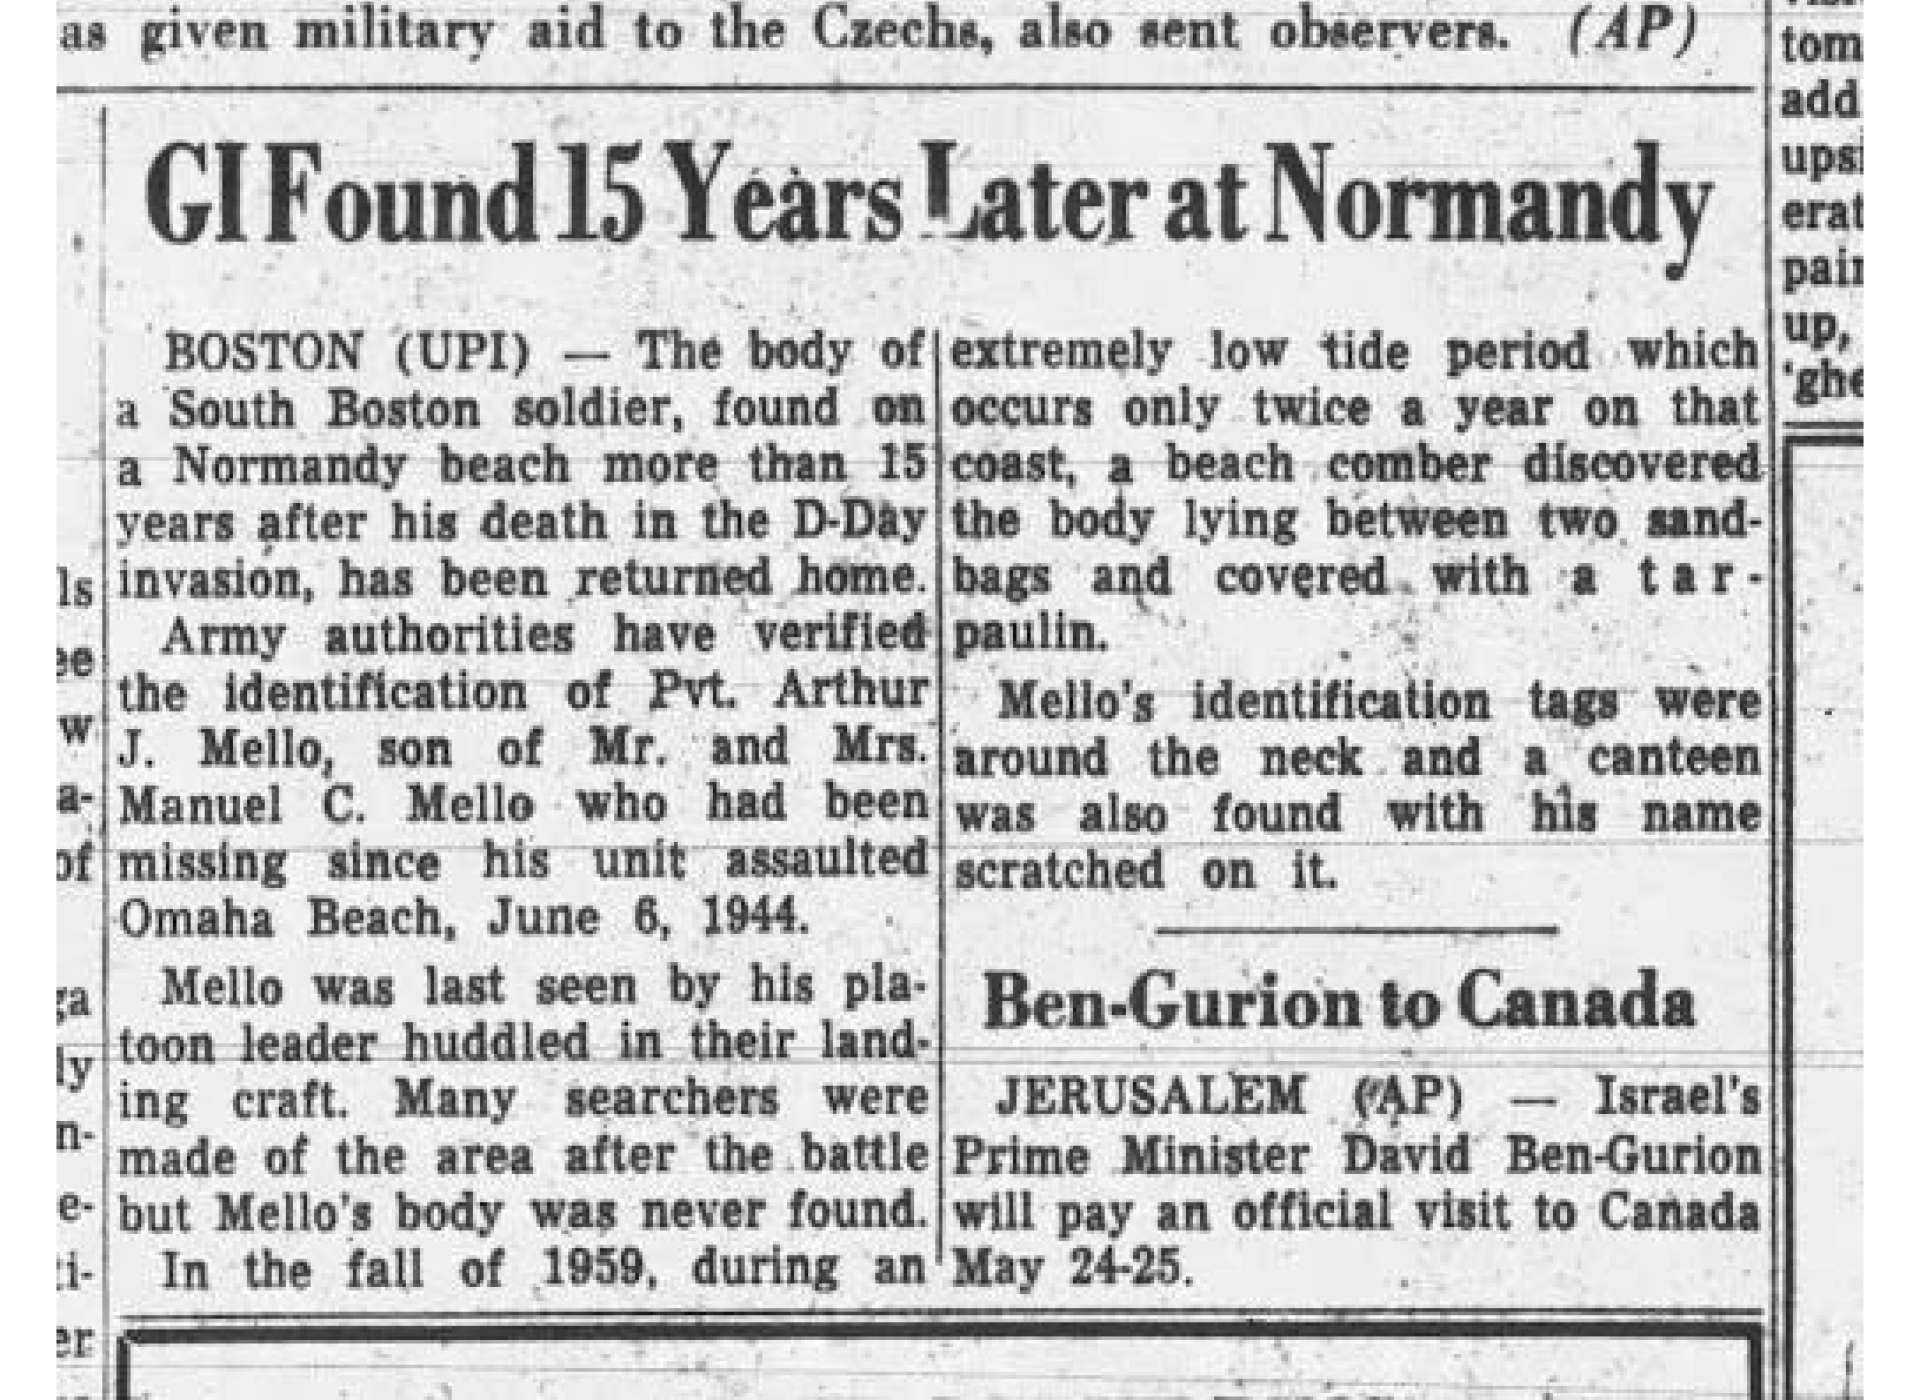 “GI Found 15 Years Later at Normandy,” The Berkshire Eagle, May 13, 1961.